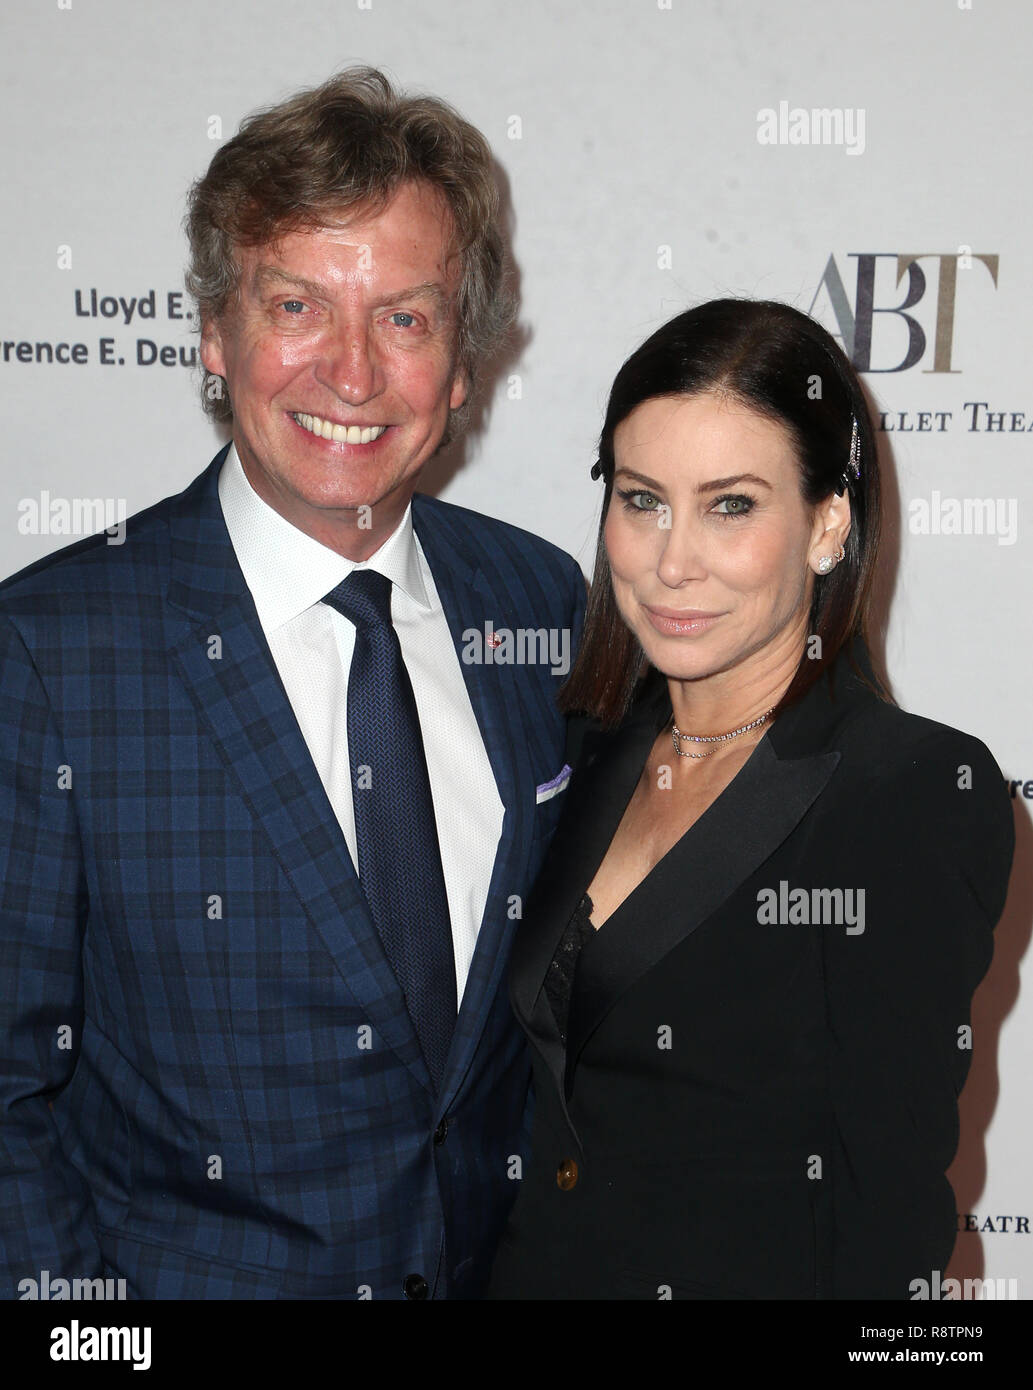 BEVERLY HILLS, CA - DECEMBER 17: Nigel Lythgoe and Sydney Holland at the American Ballet Theatre’s Annual Holiday Benefit at The Beverly Hilton Hotel in Beverly Hills, California on December 17, 2018. Credit: Faye Sadou/MediaPunch Stock Photo